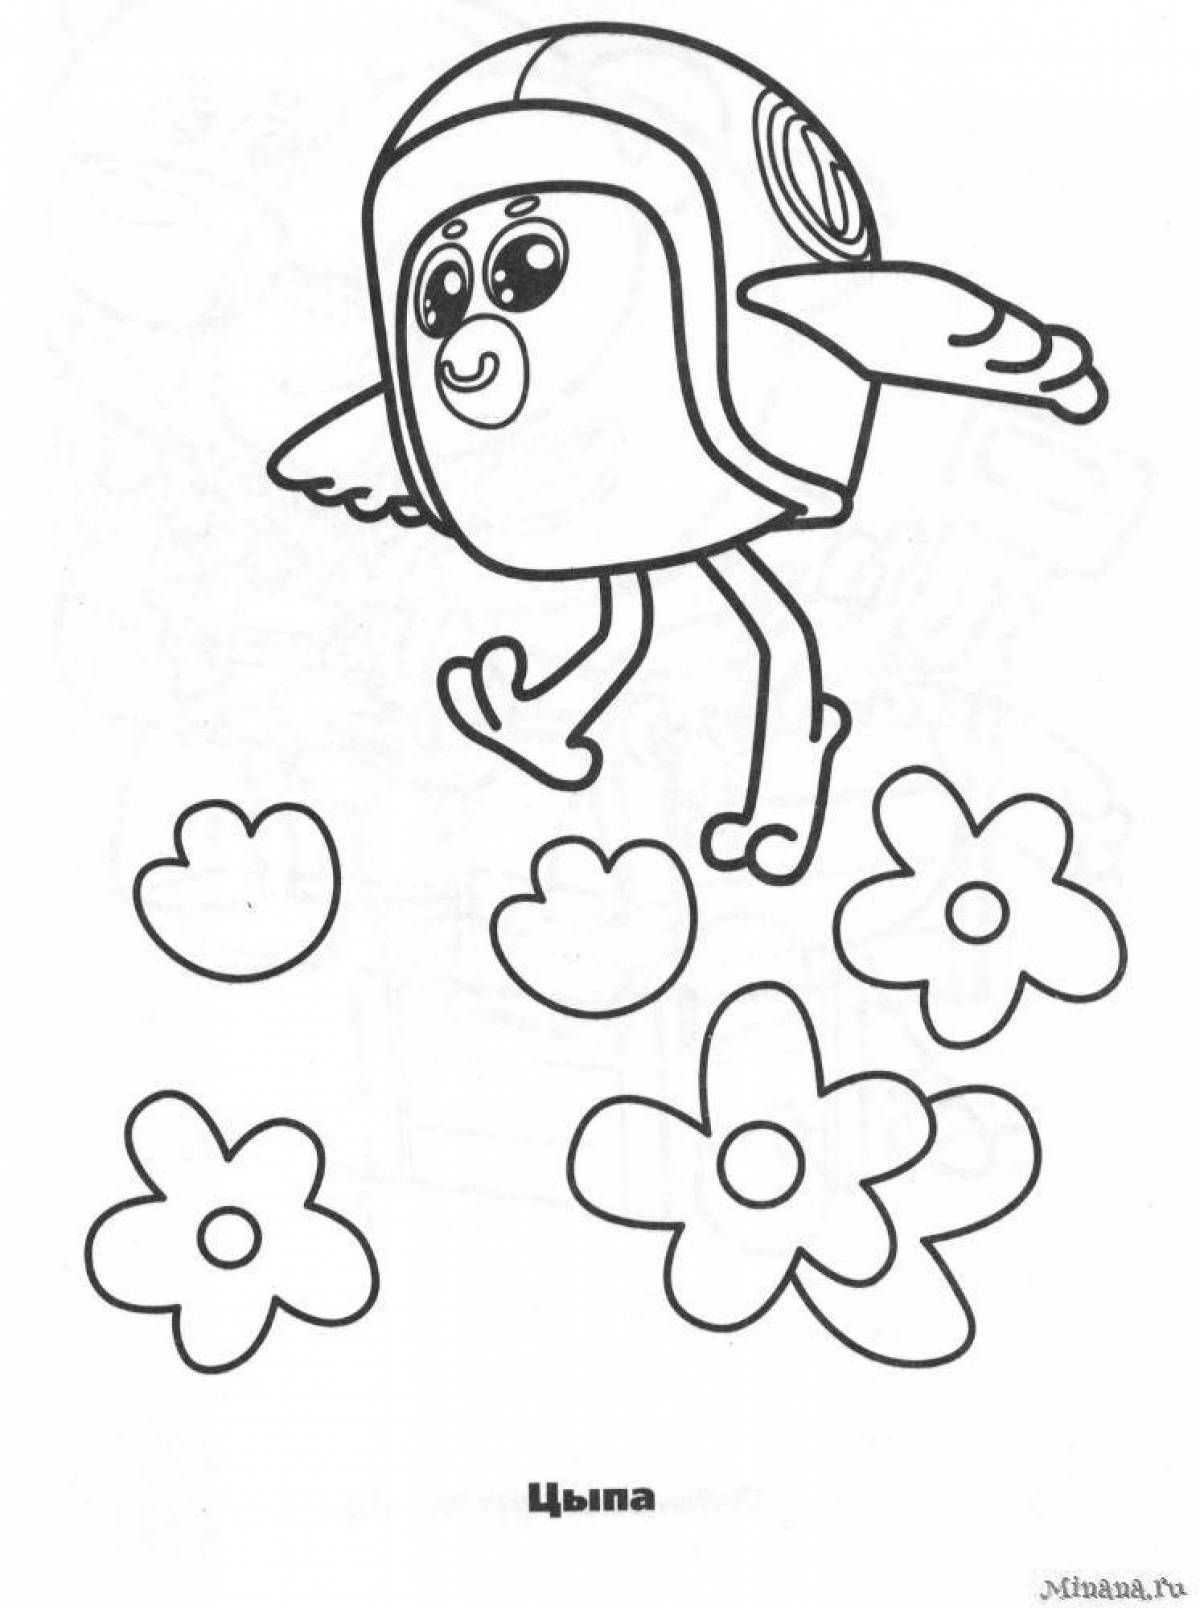 Cute and adorable cute chick coloring book